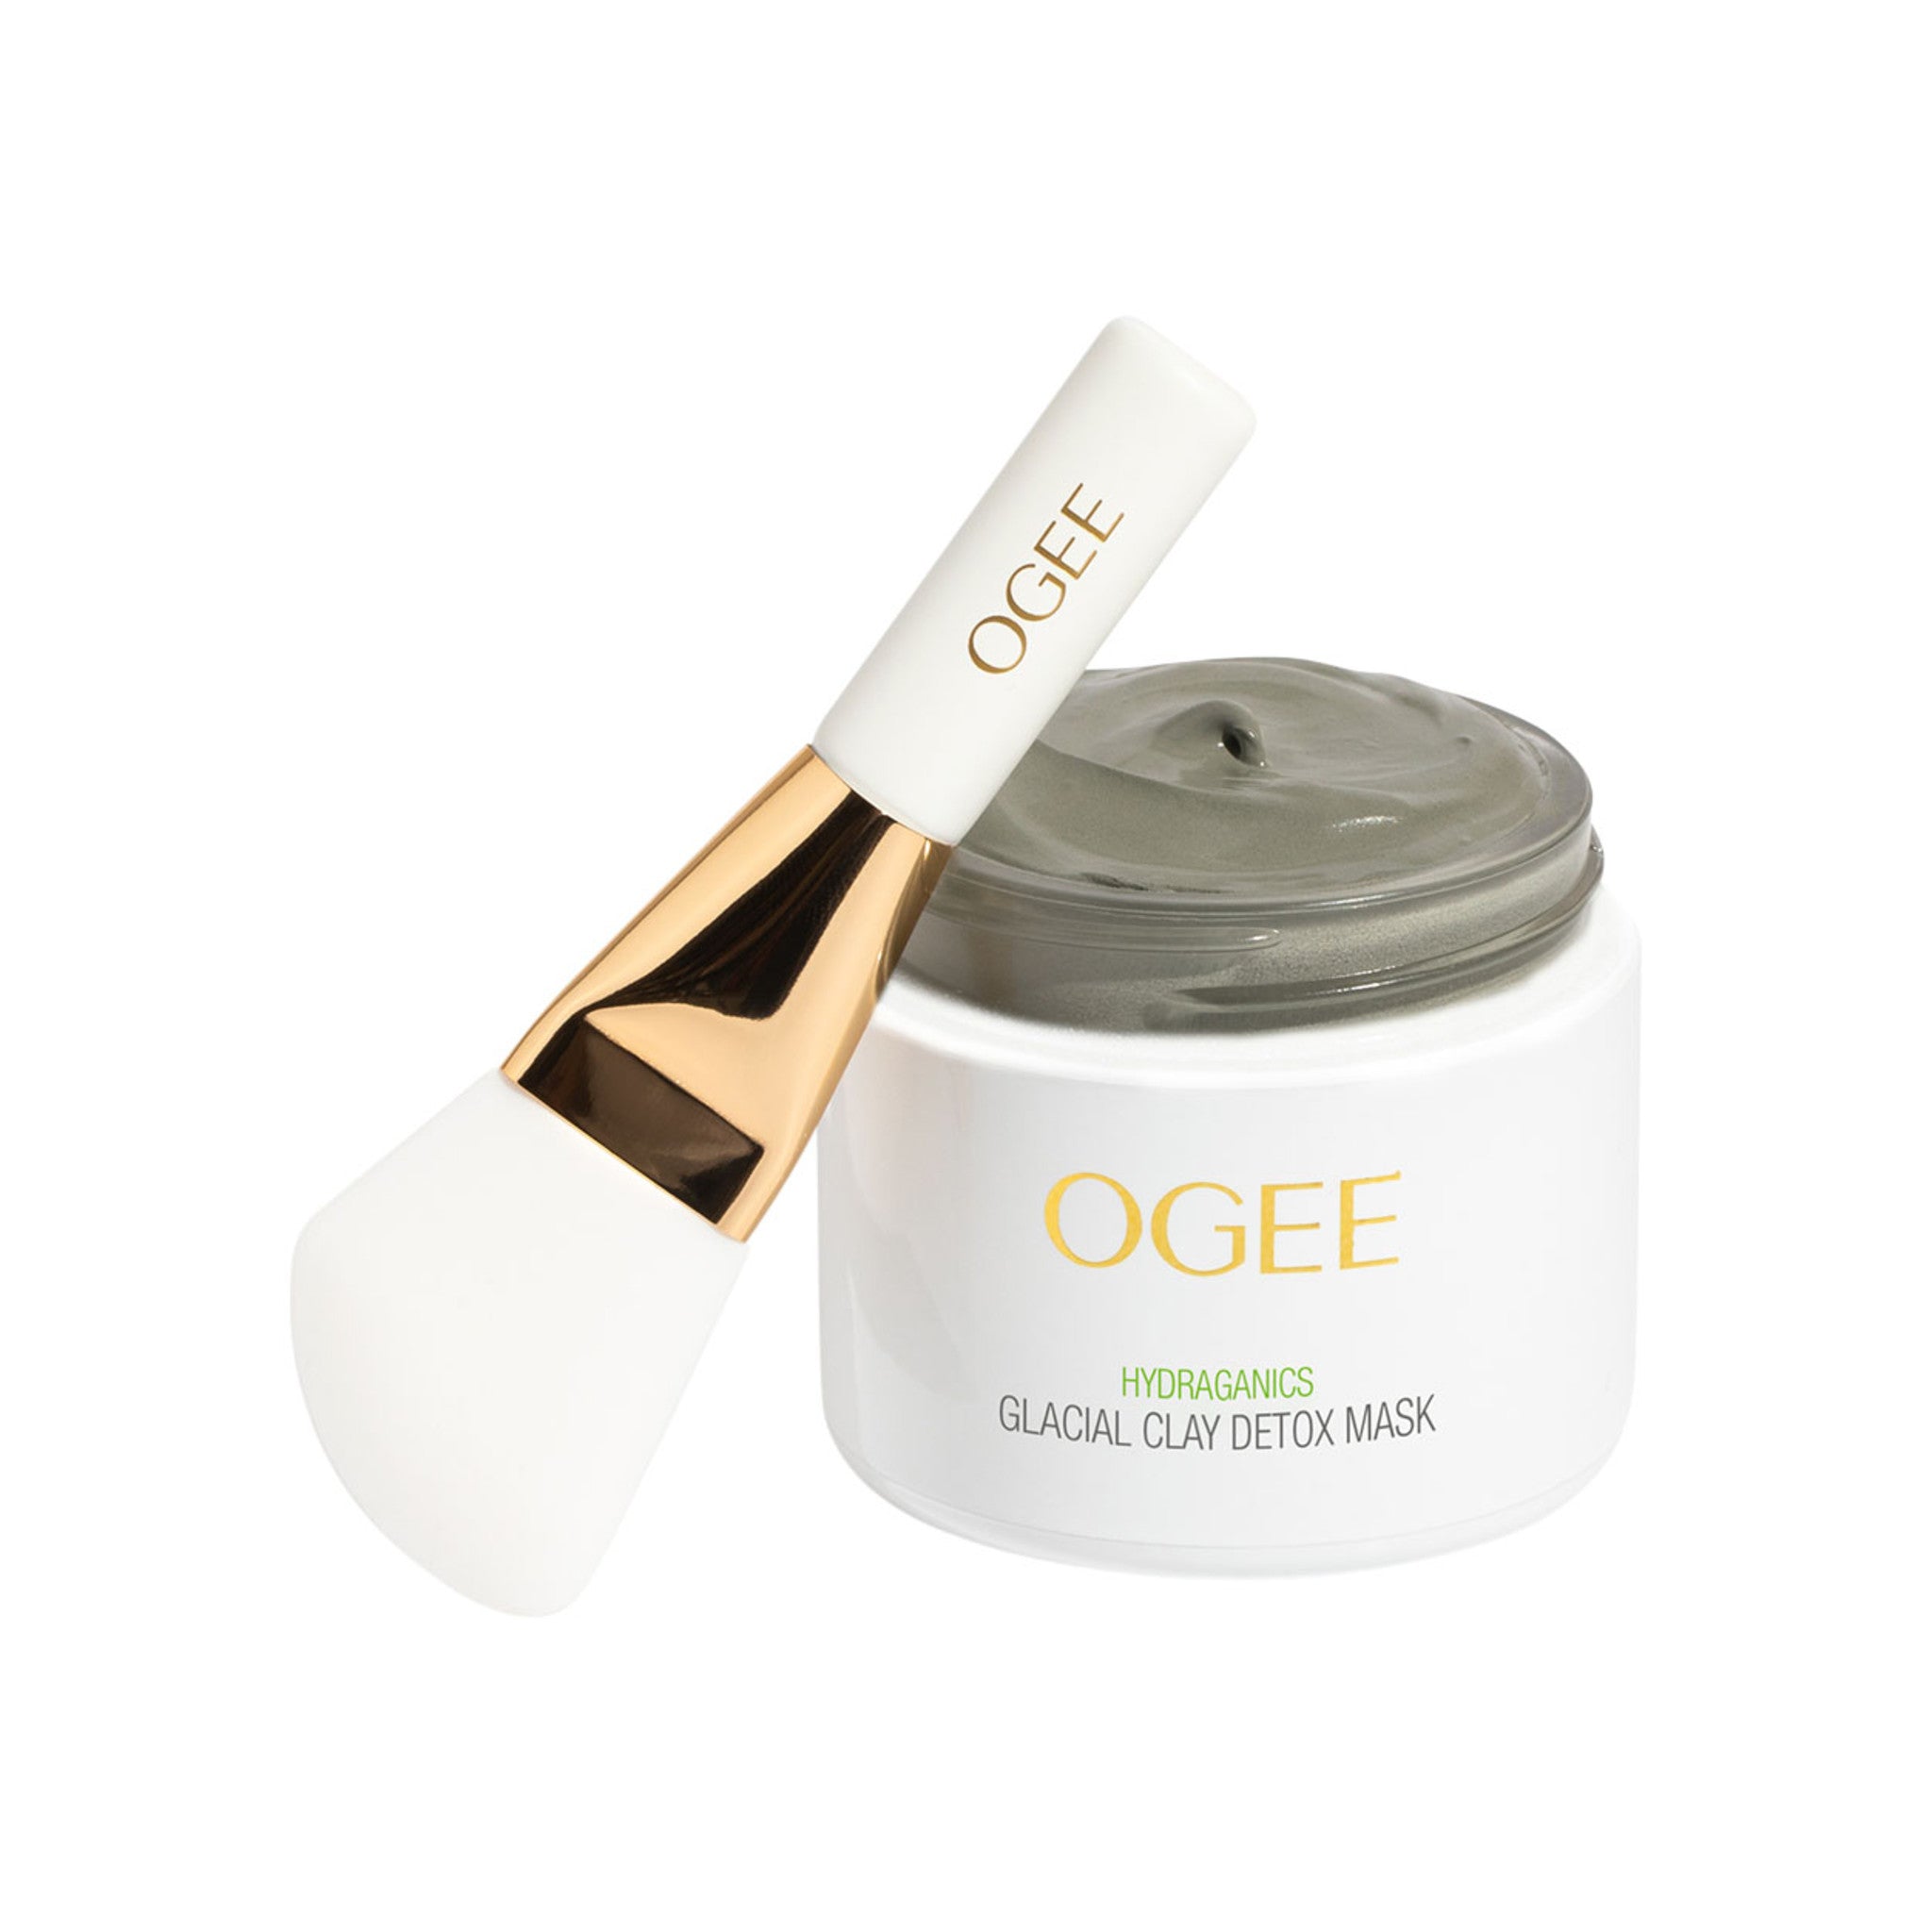 Ogee Glacial Clay Detox Mask main image.